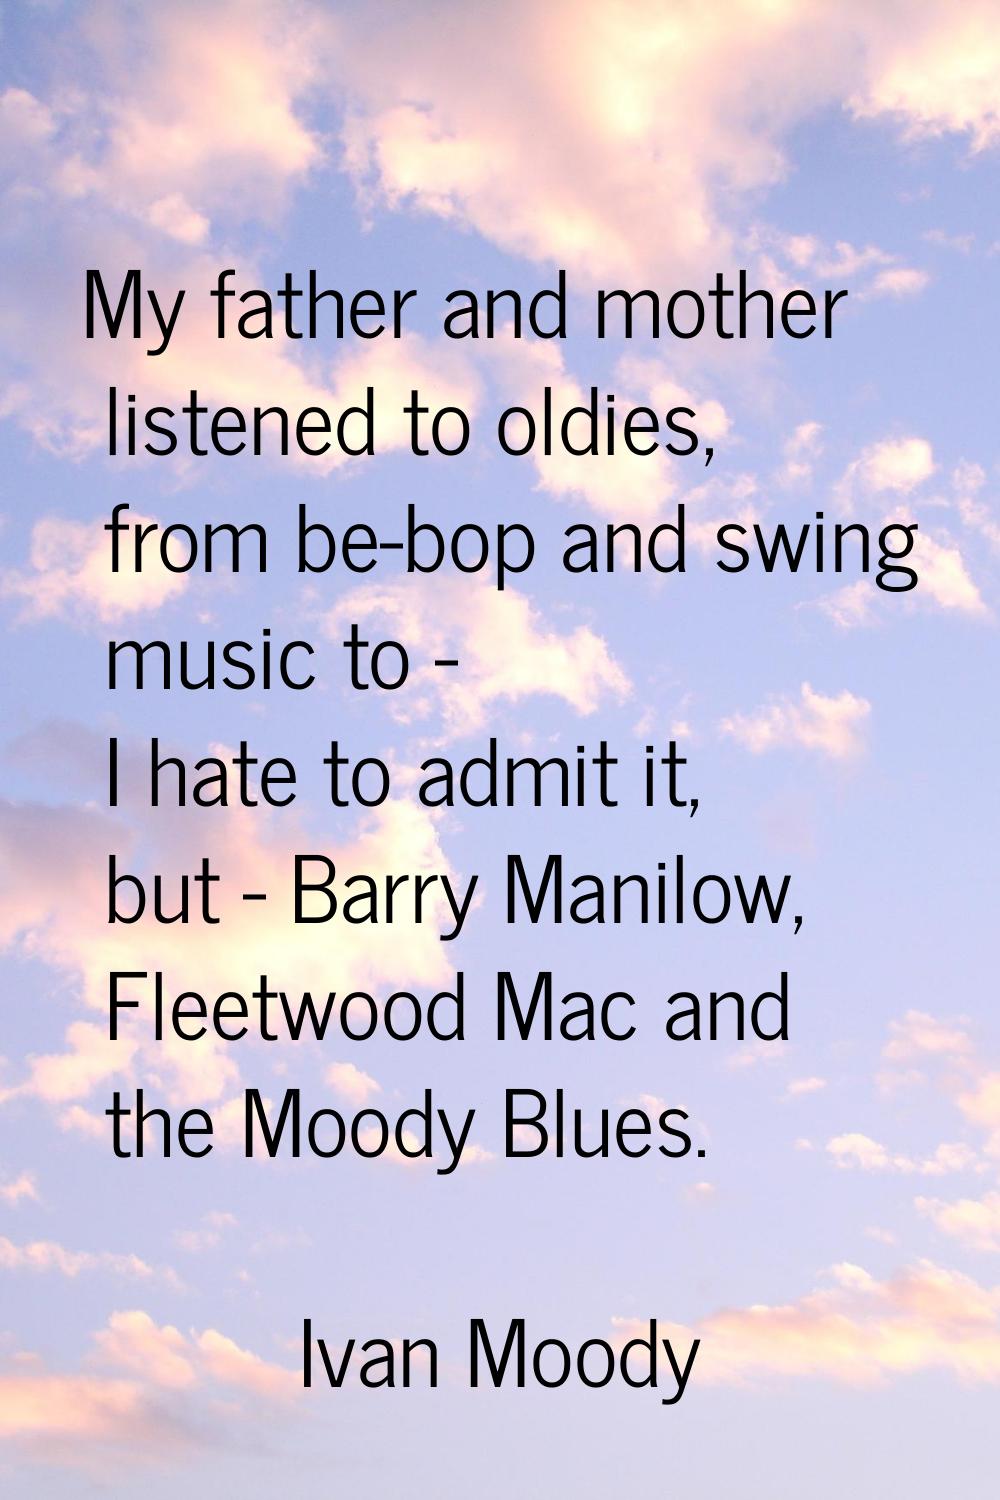 My father and mother listened to oldies, from be-bop and swing music to - I hate to admit it, but -